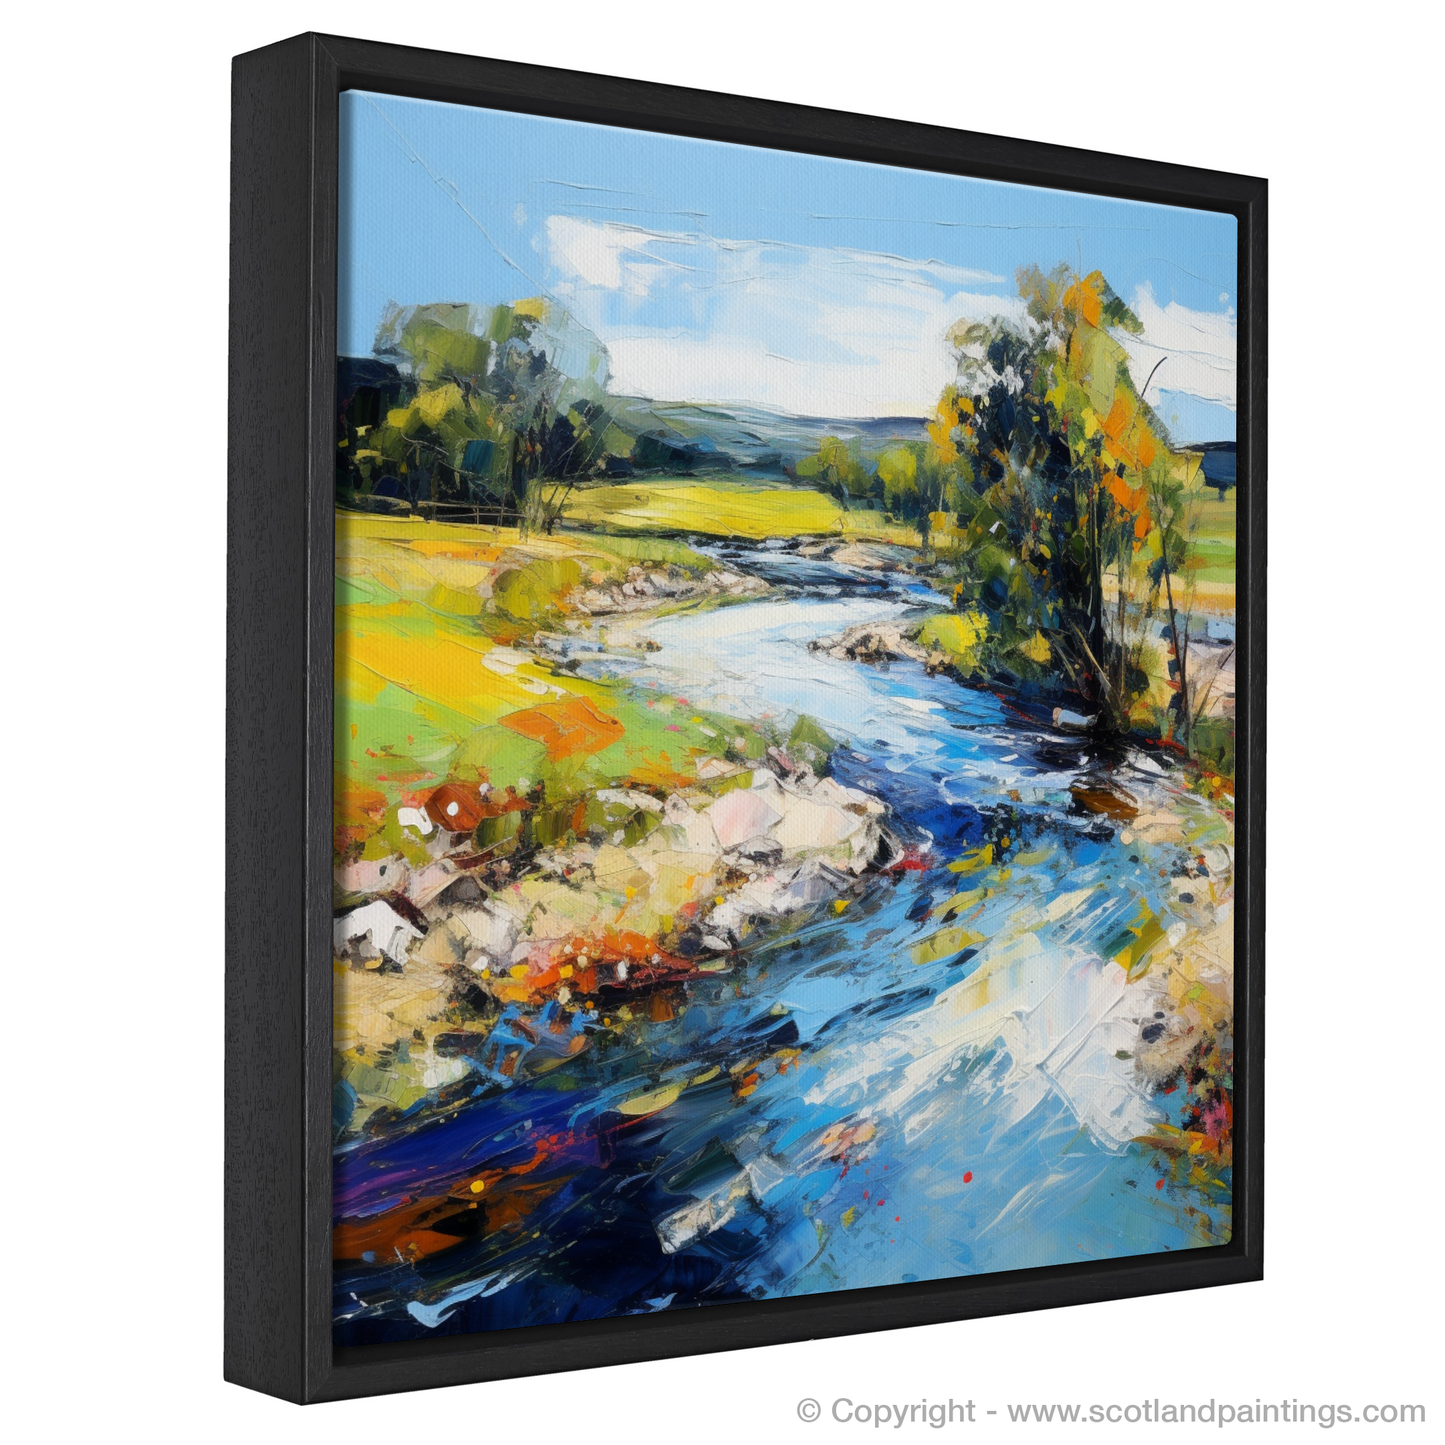 Painting and Art Print of River Deveron, Aberdeenshire in summer entitled "Summer Rhapsody on the River Deveron".